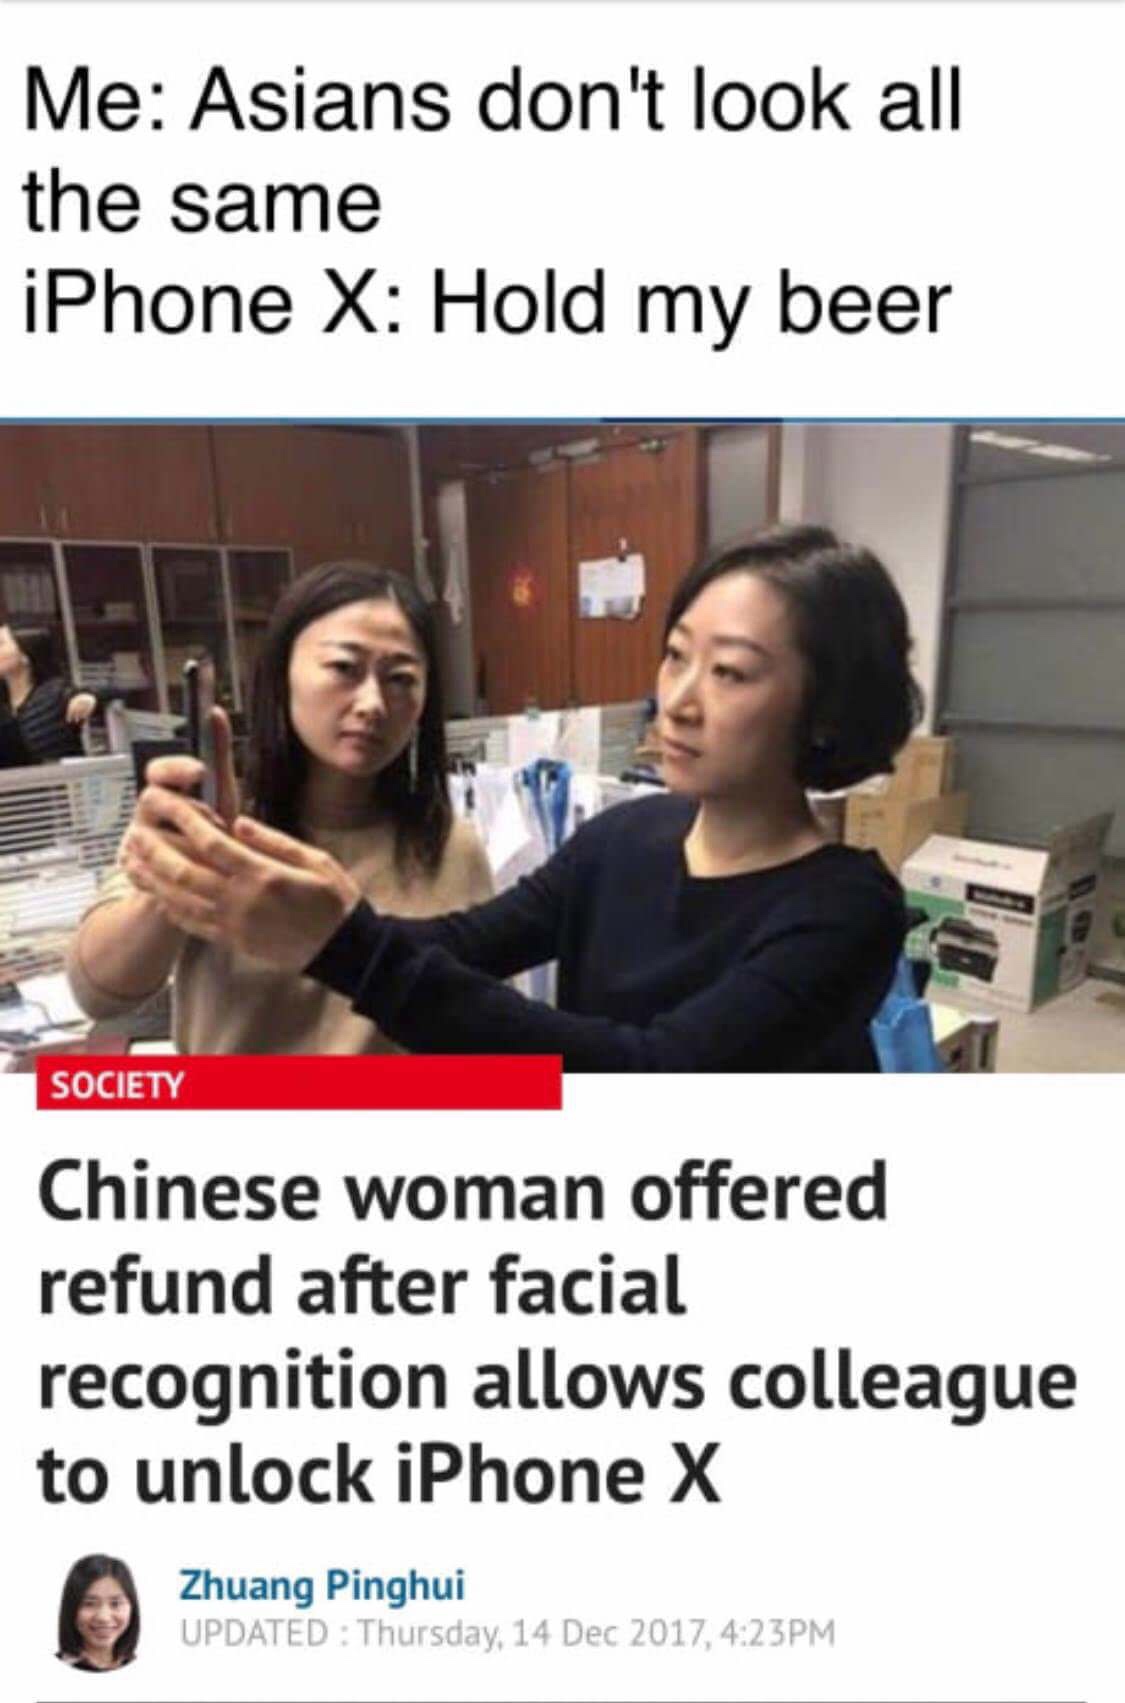 random pics - chinese woman iphone x - Me Asians don't look all the same iPhone X Hold my beer Society Chinese woman offered refund after facial recognition allows colleague to unlock iPhone X Zhuang Pinghui Updated Thursday, , Pm